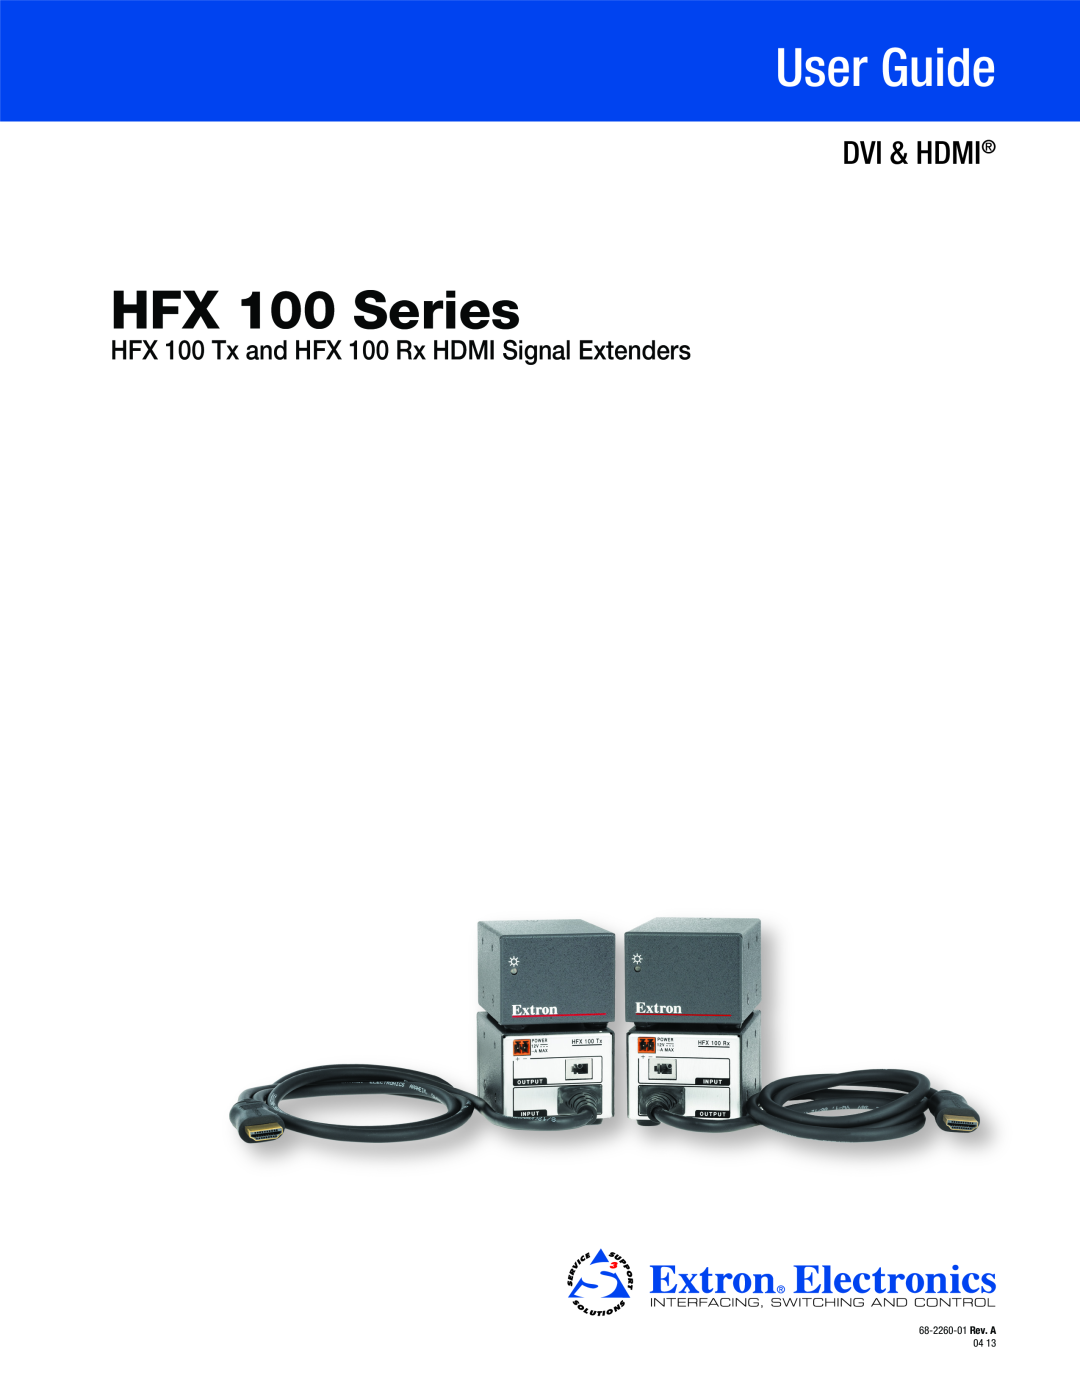 Extron electronic setup guide HFX 100 Series Setup Guide, Installation, b ad, Mounting, Cable Connections, Extron 